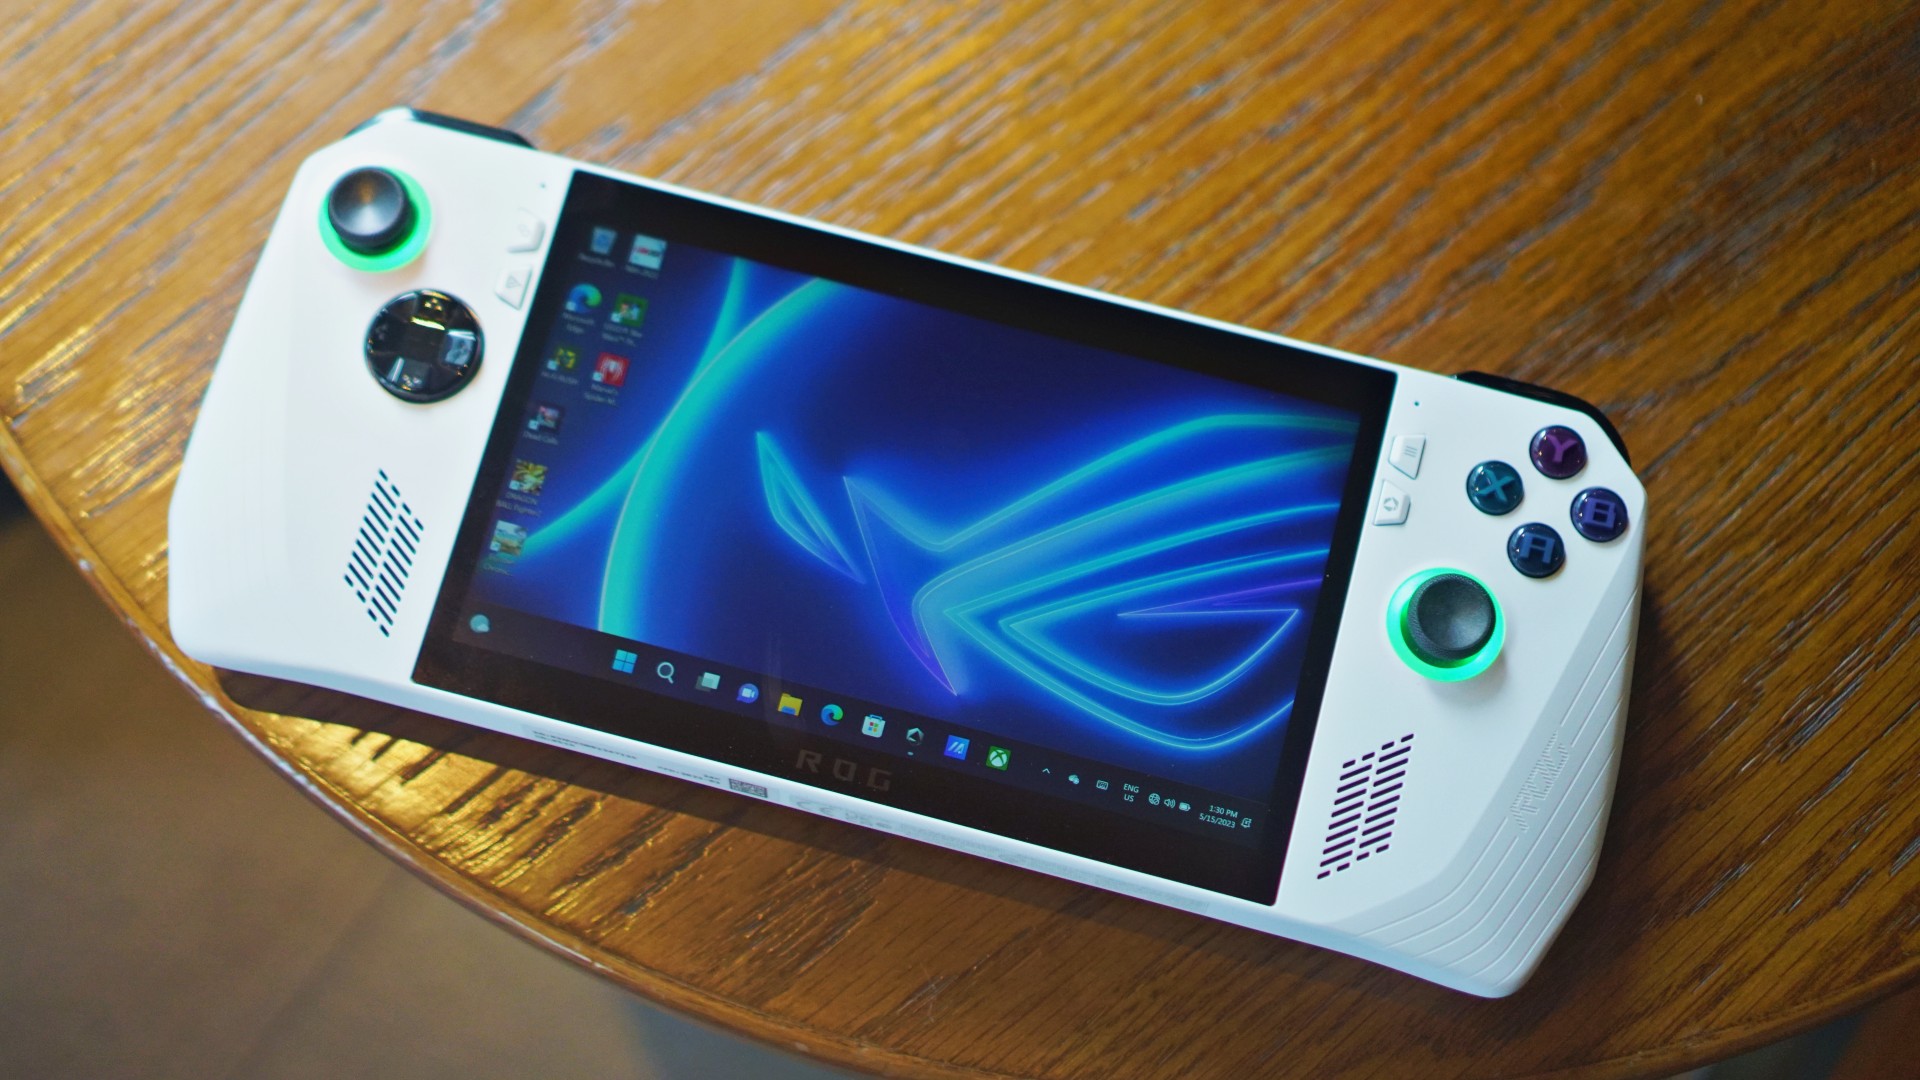 ROG Ally review: Asus' handheld gaming device is good, but not perfect